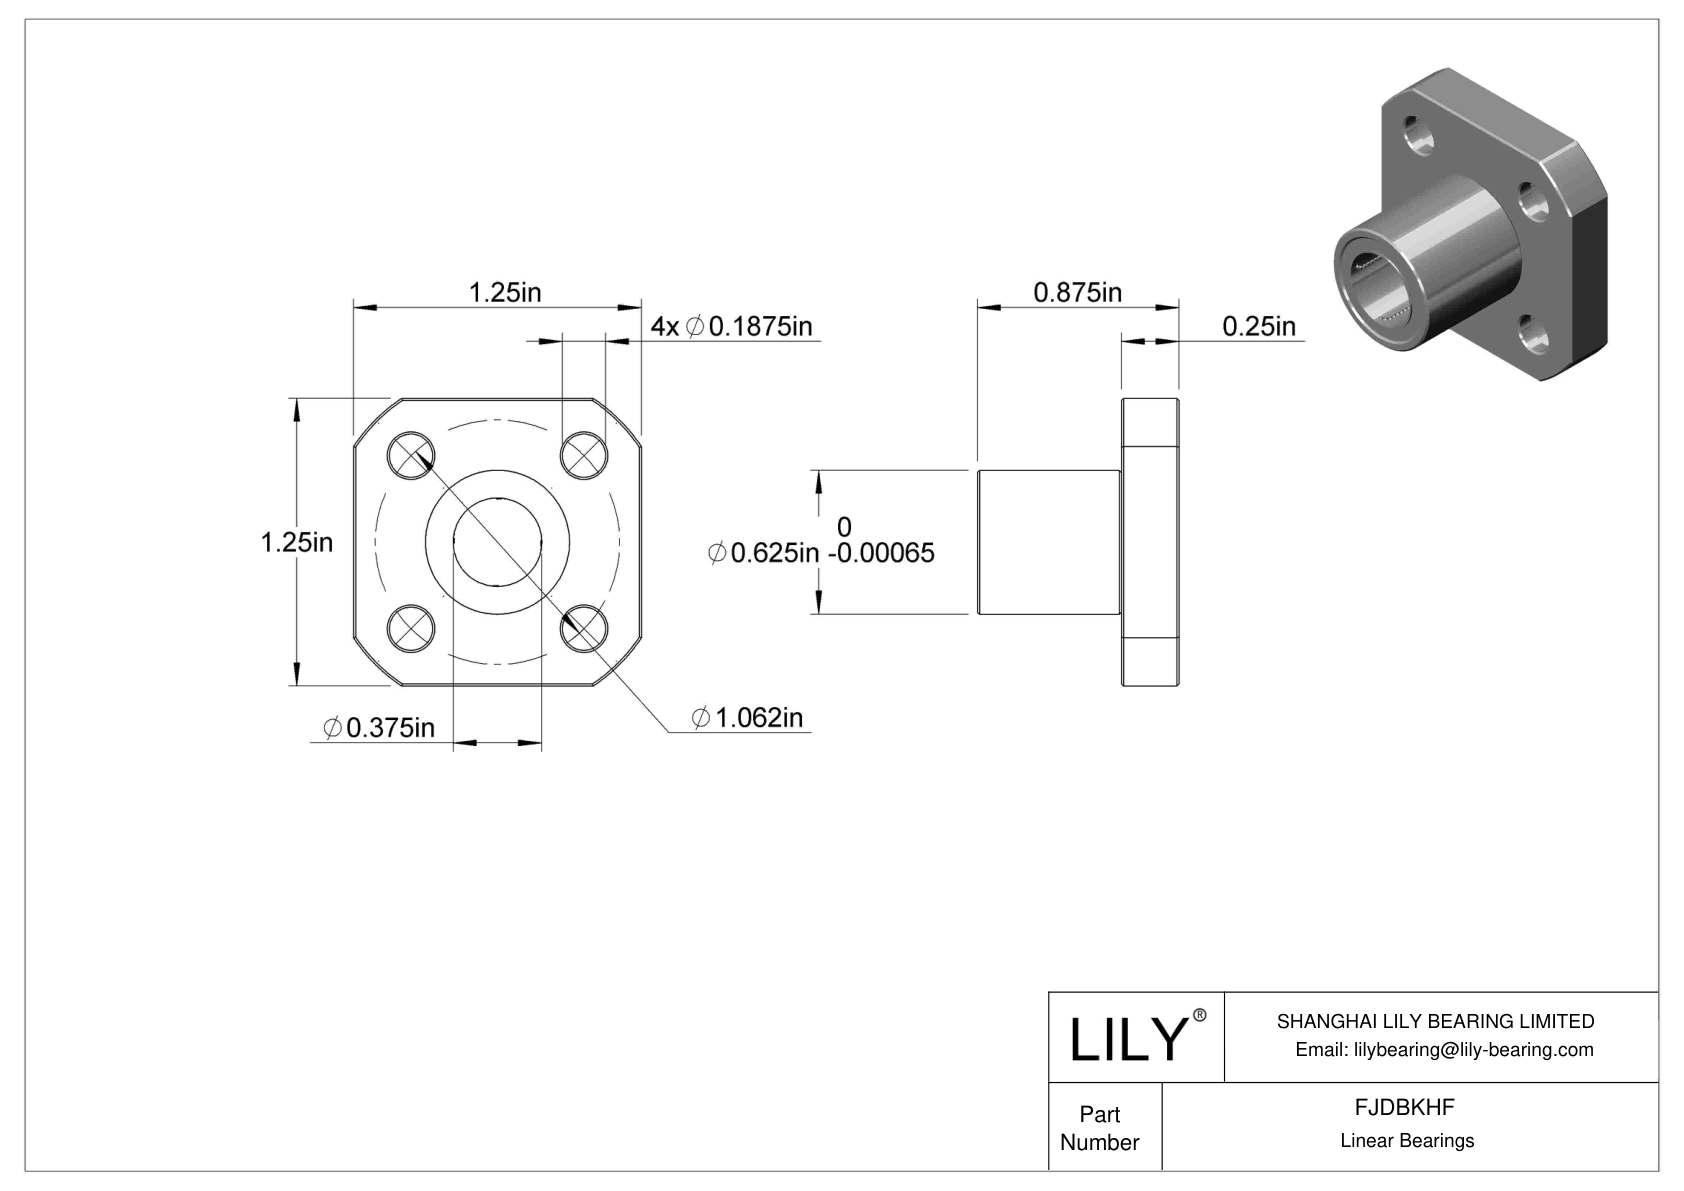 FJDBKHF Corrosion-Resistant Flange-Mounted Linear Ball Bearings cad drawing